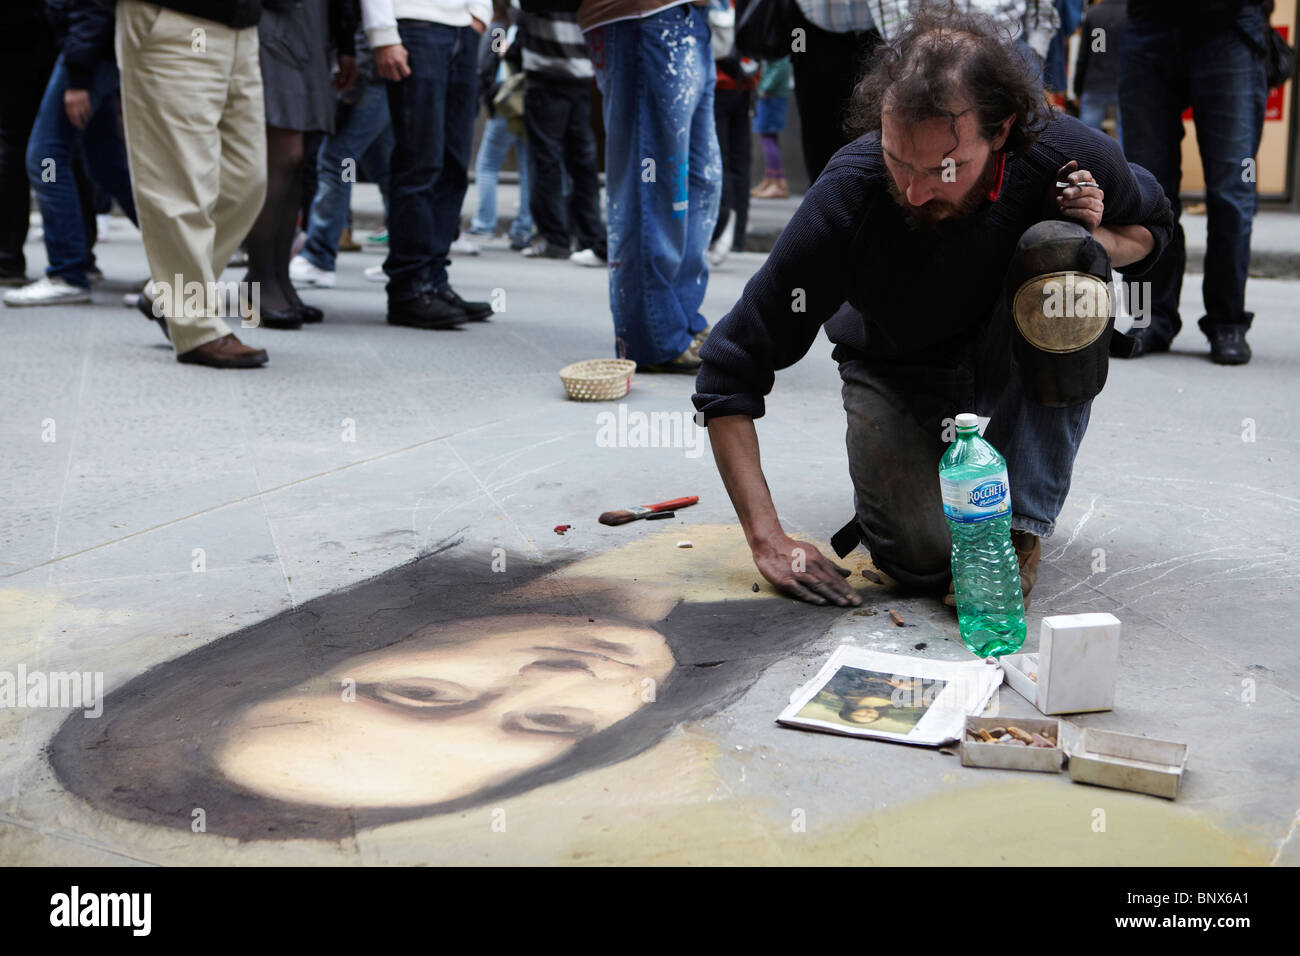 Street artist painting the Mona Lisa on a pavement in Florence, Italy Stock Photo